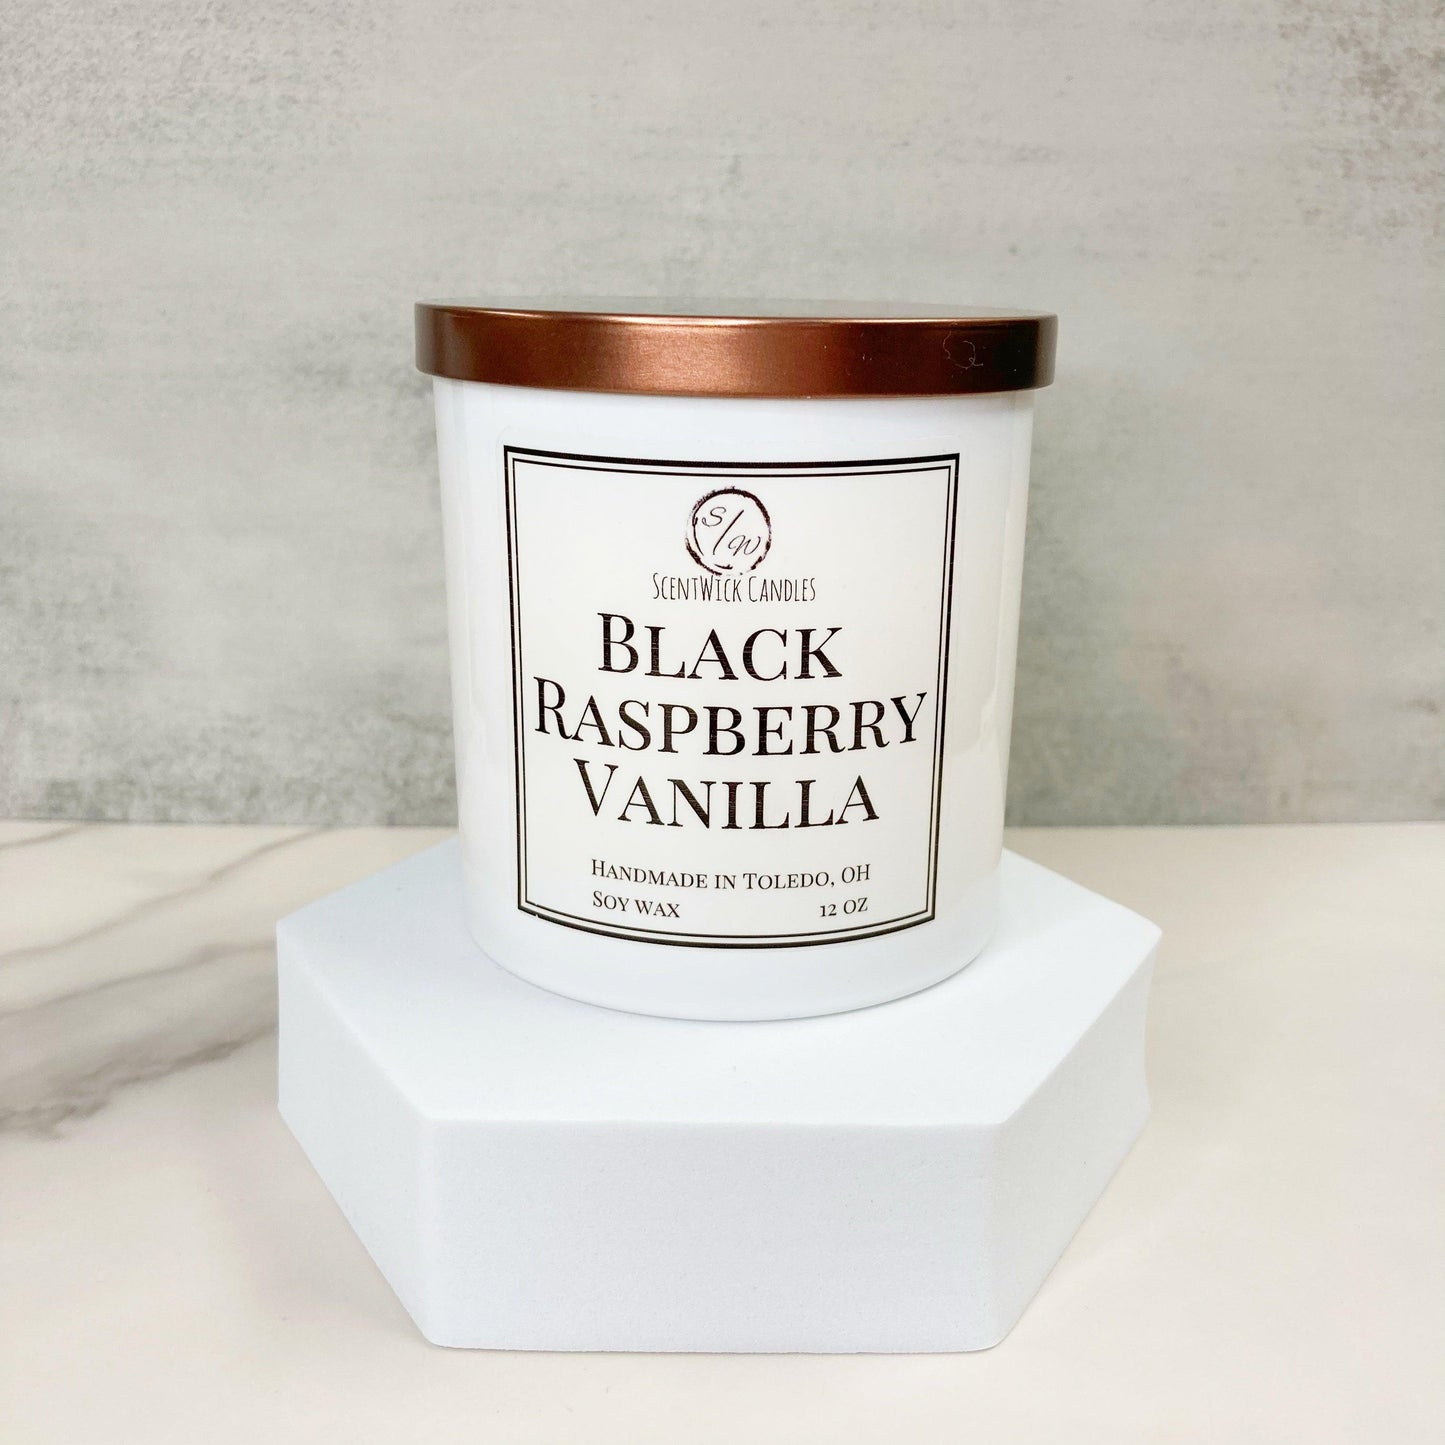 The Copper & Gold Collection - Black Raspberry Vanilla Candle - ScentWick Candles